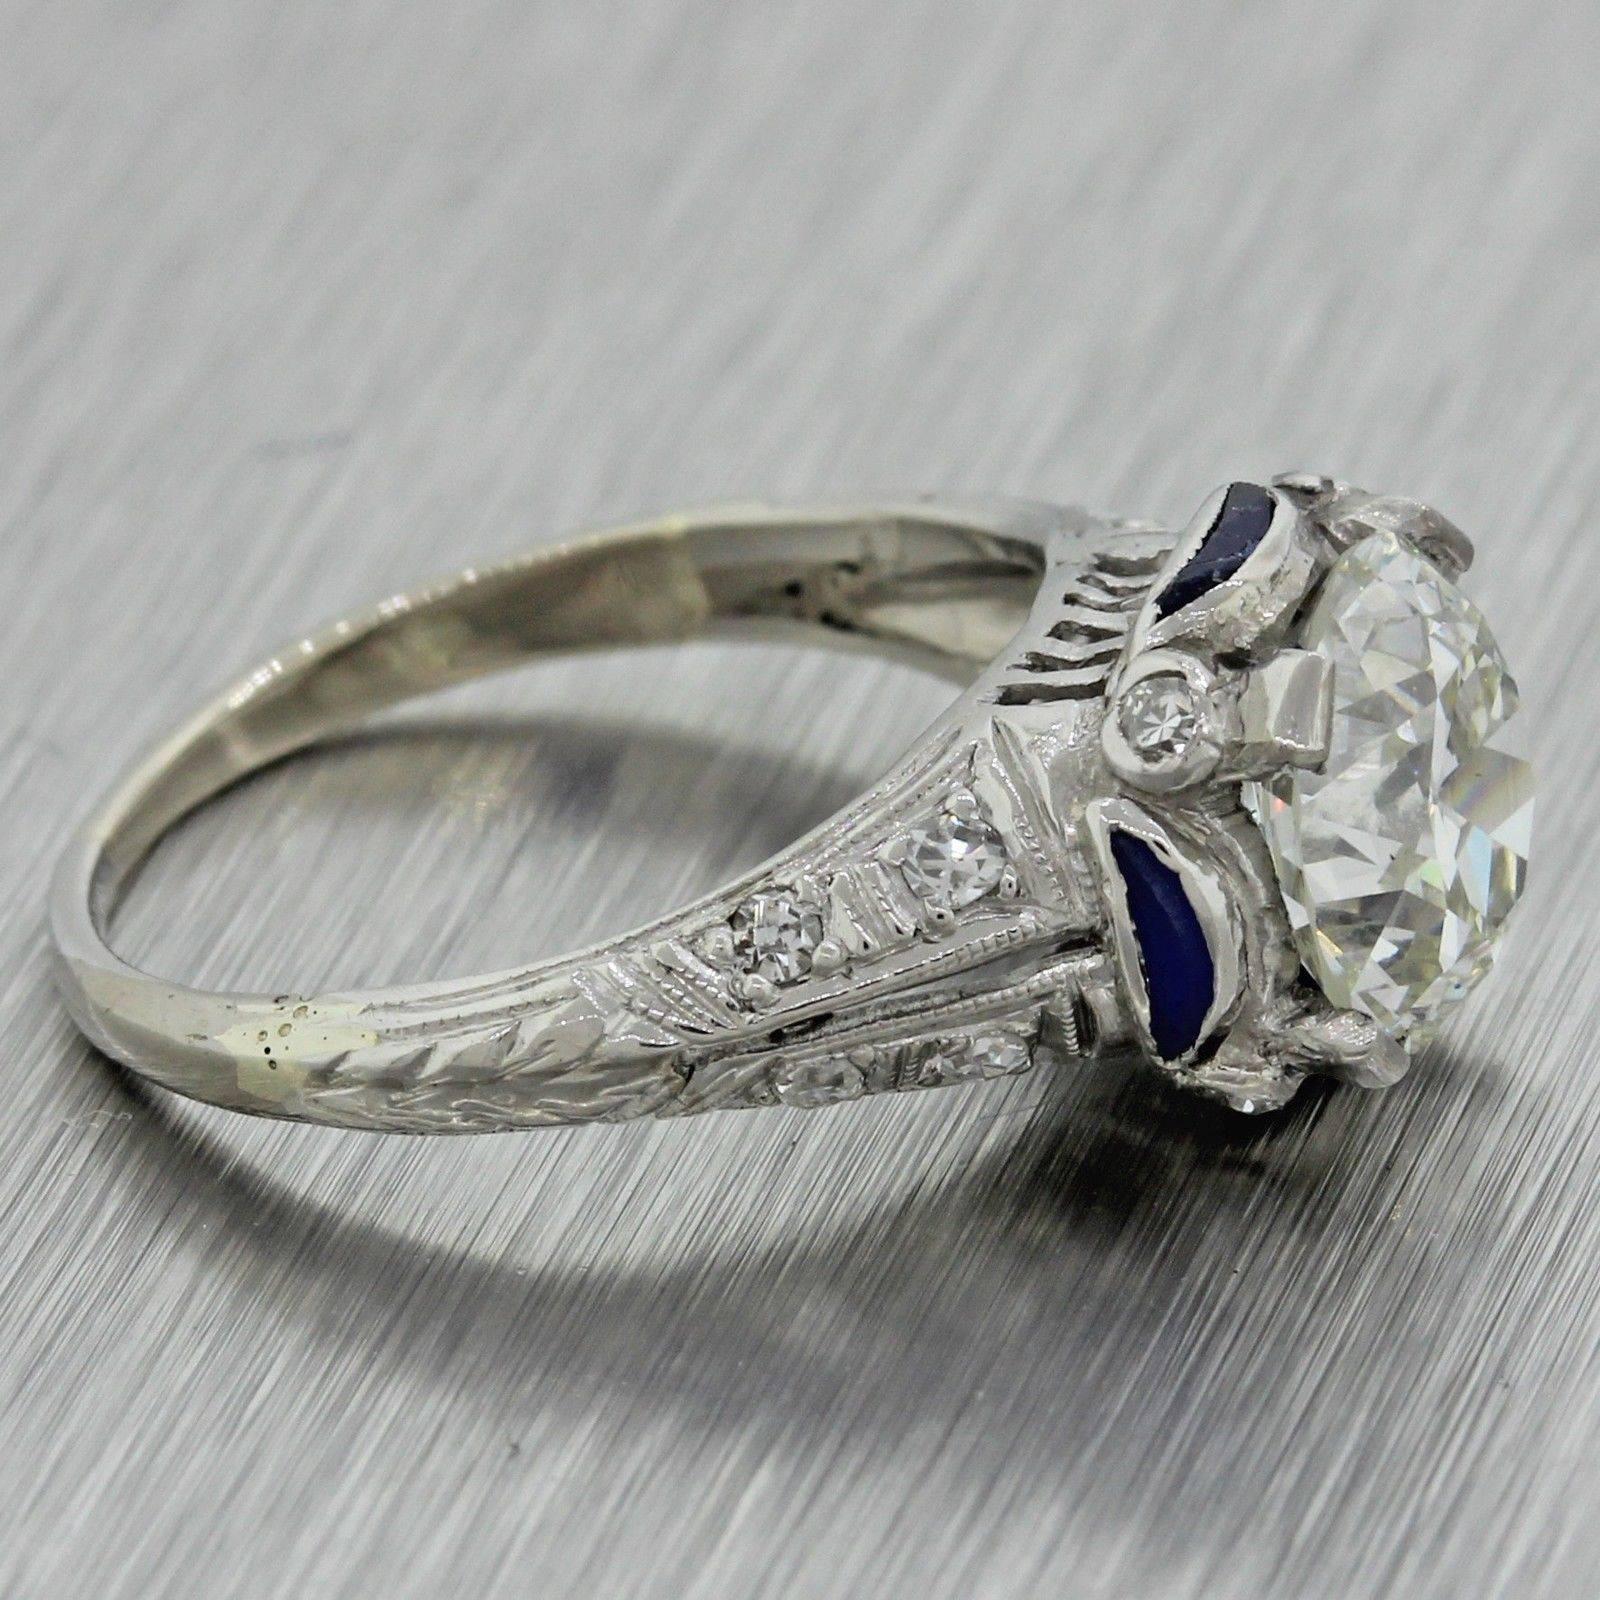 This is another gorgeous and stunning antique art deco platinum diamond and sapphire engagement ring that can dated back to the 1920's. This engagement ring's center stone was graded by GIA; one of the most reputable diamond grading organizations in